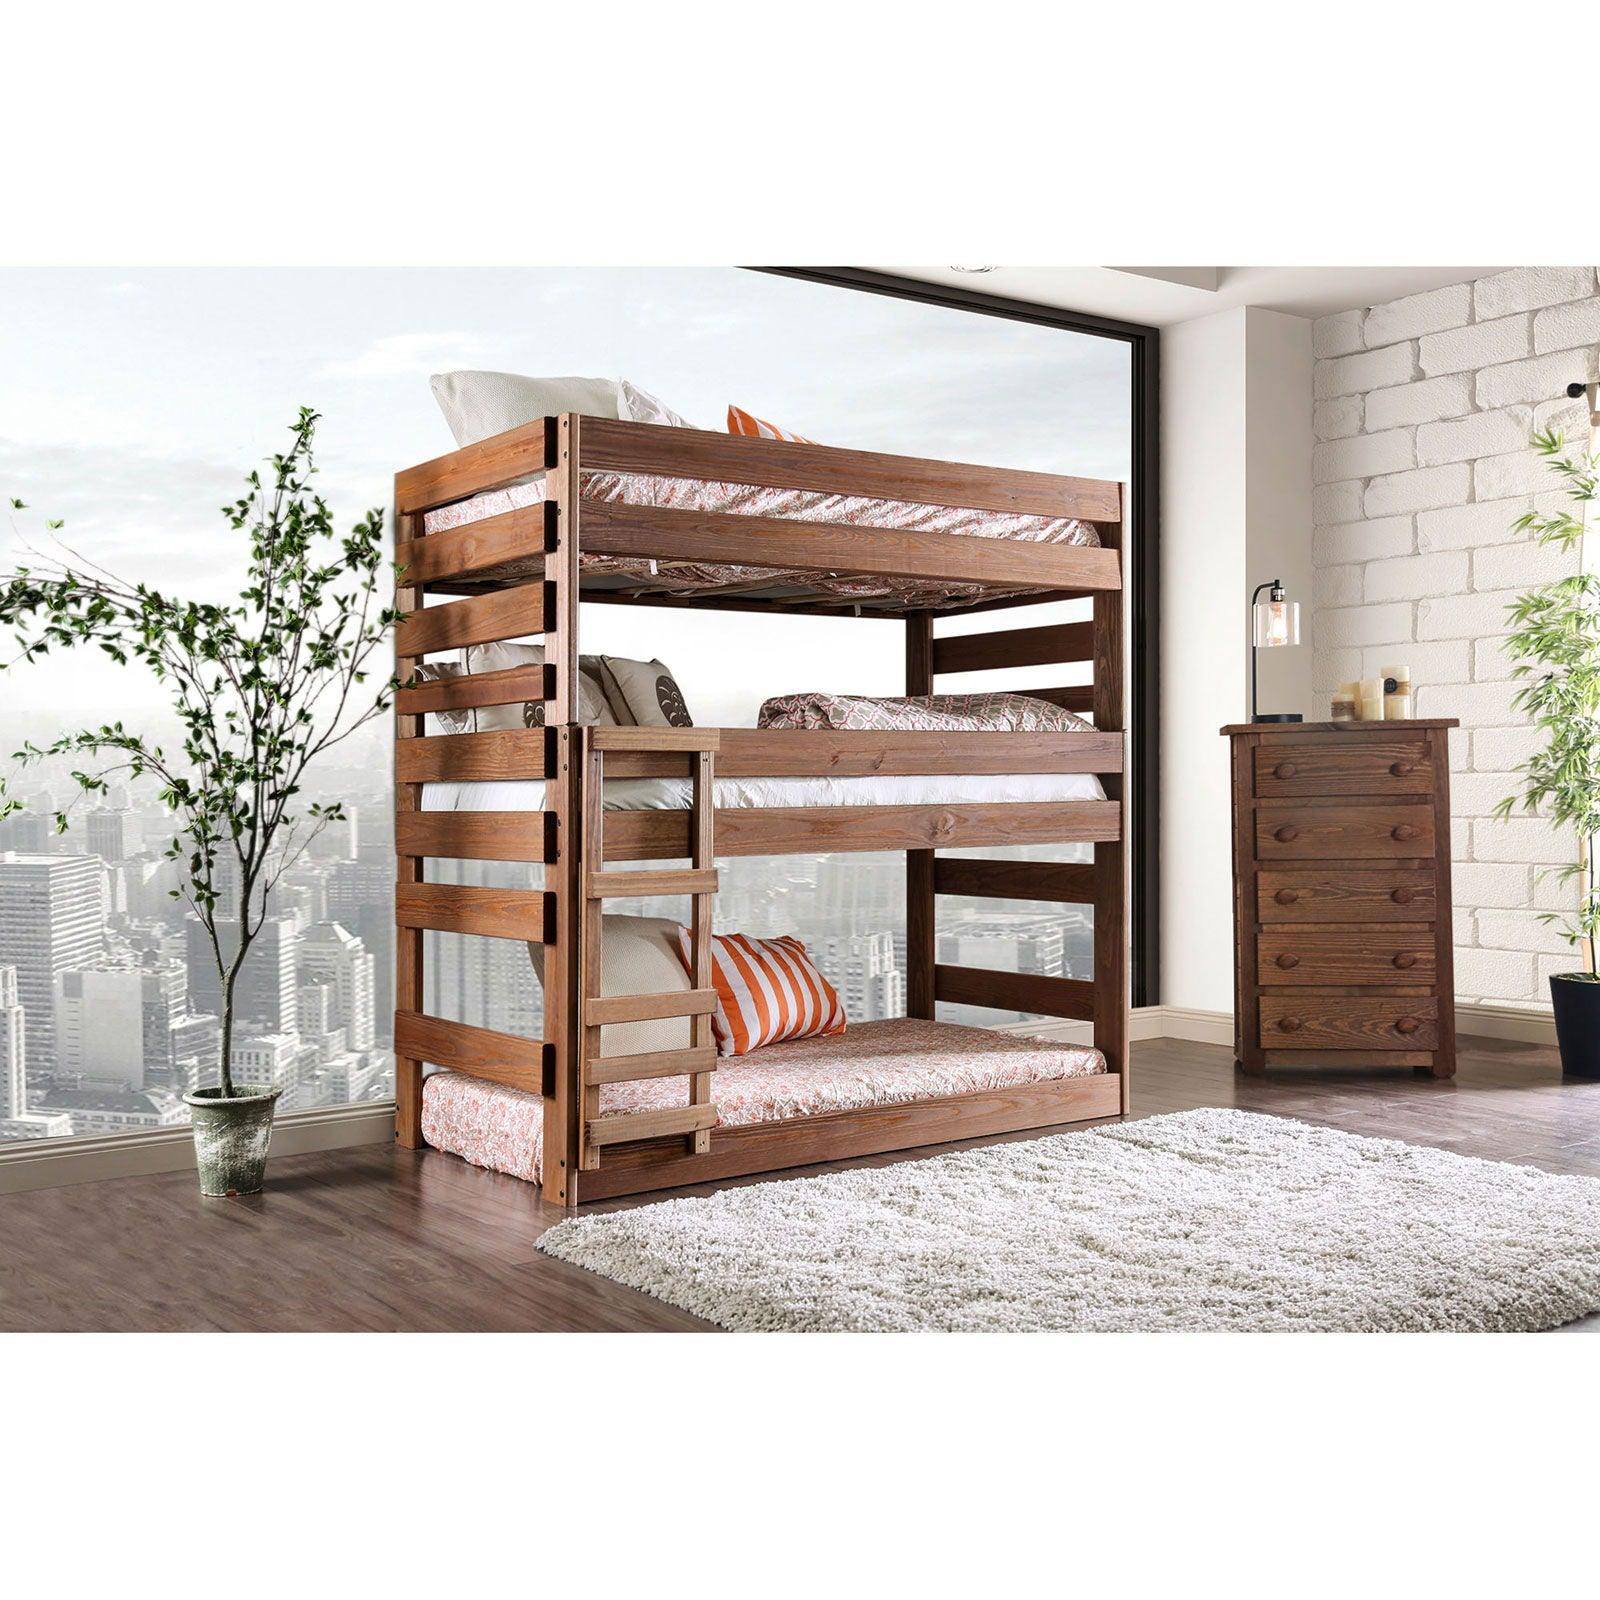 Furniture of America - Pollyanna - Twin Bed With 3 Slat Kits - Mahogany - 5th Avenue Furniture